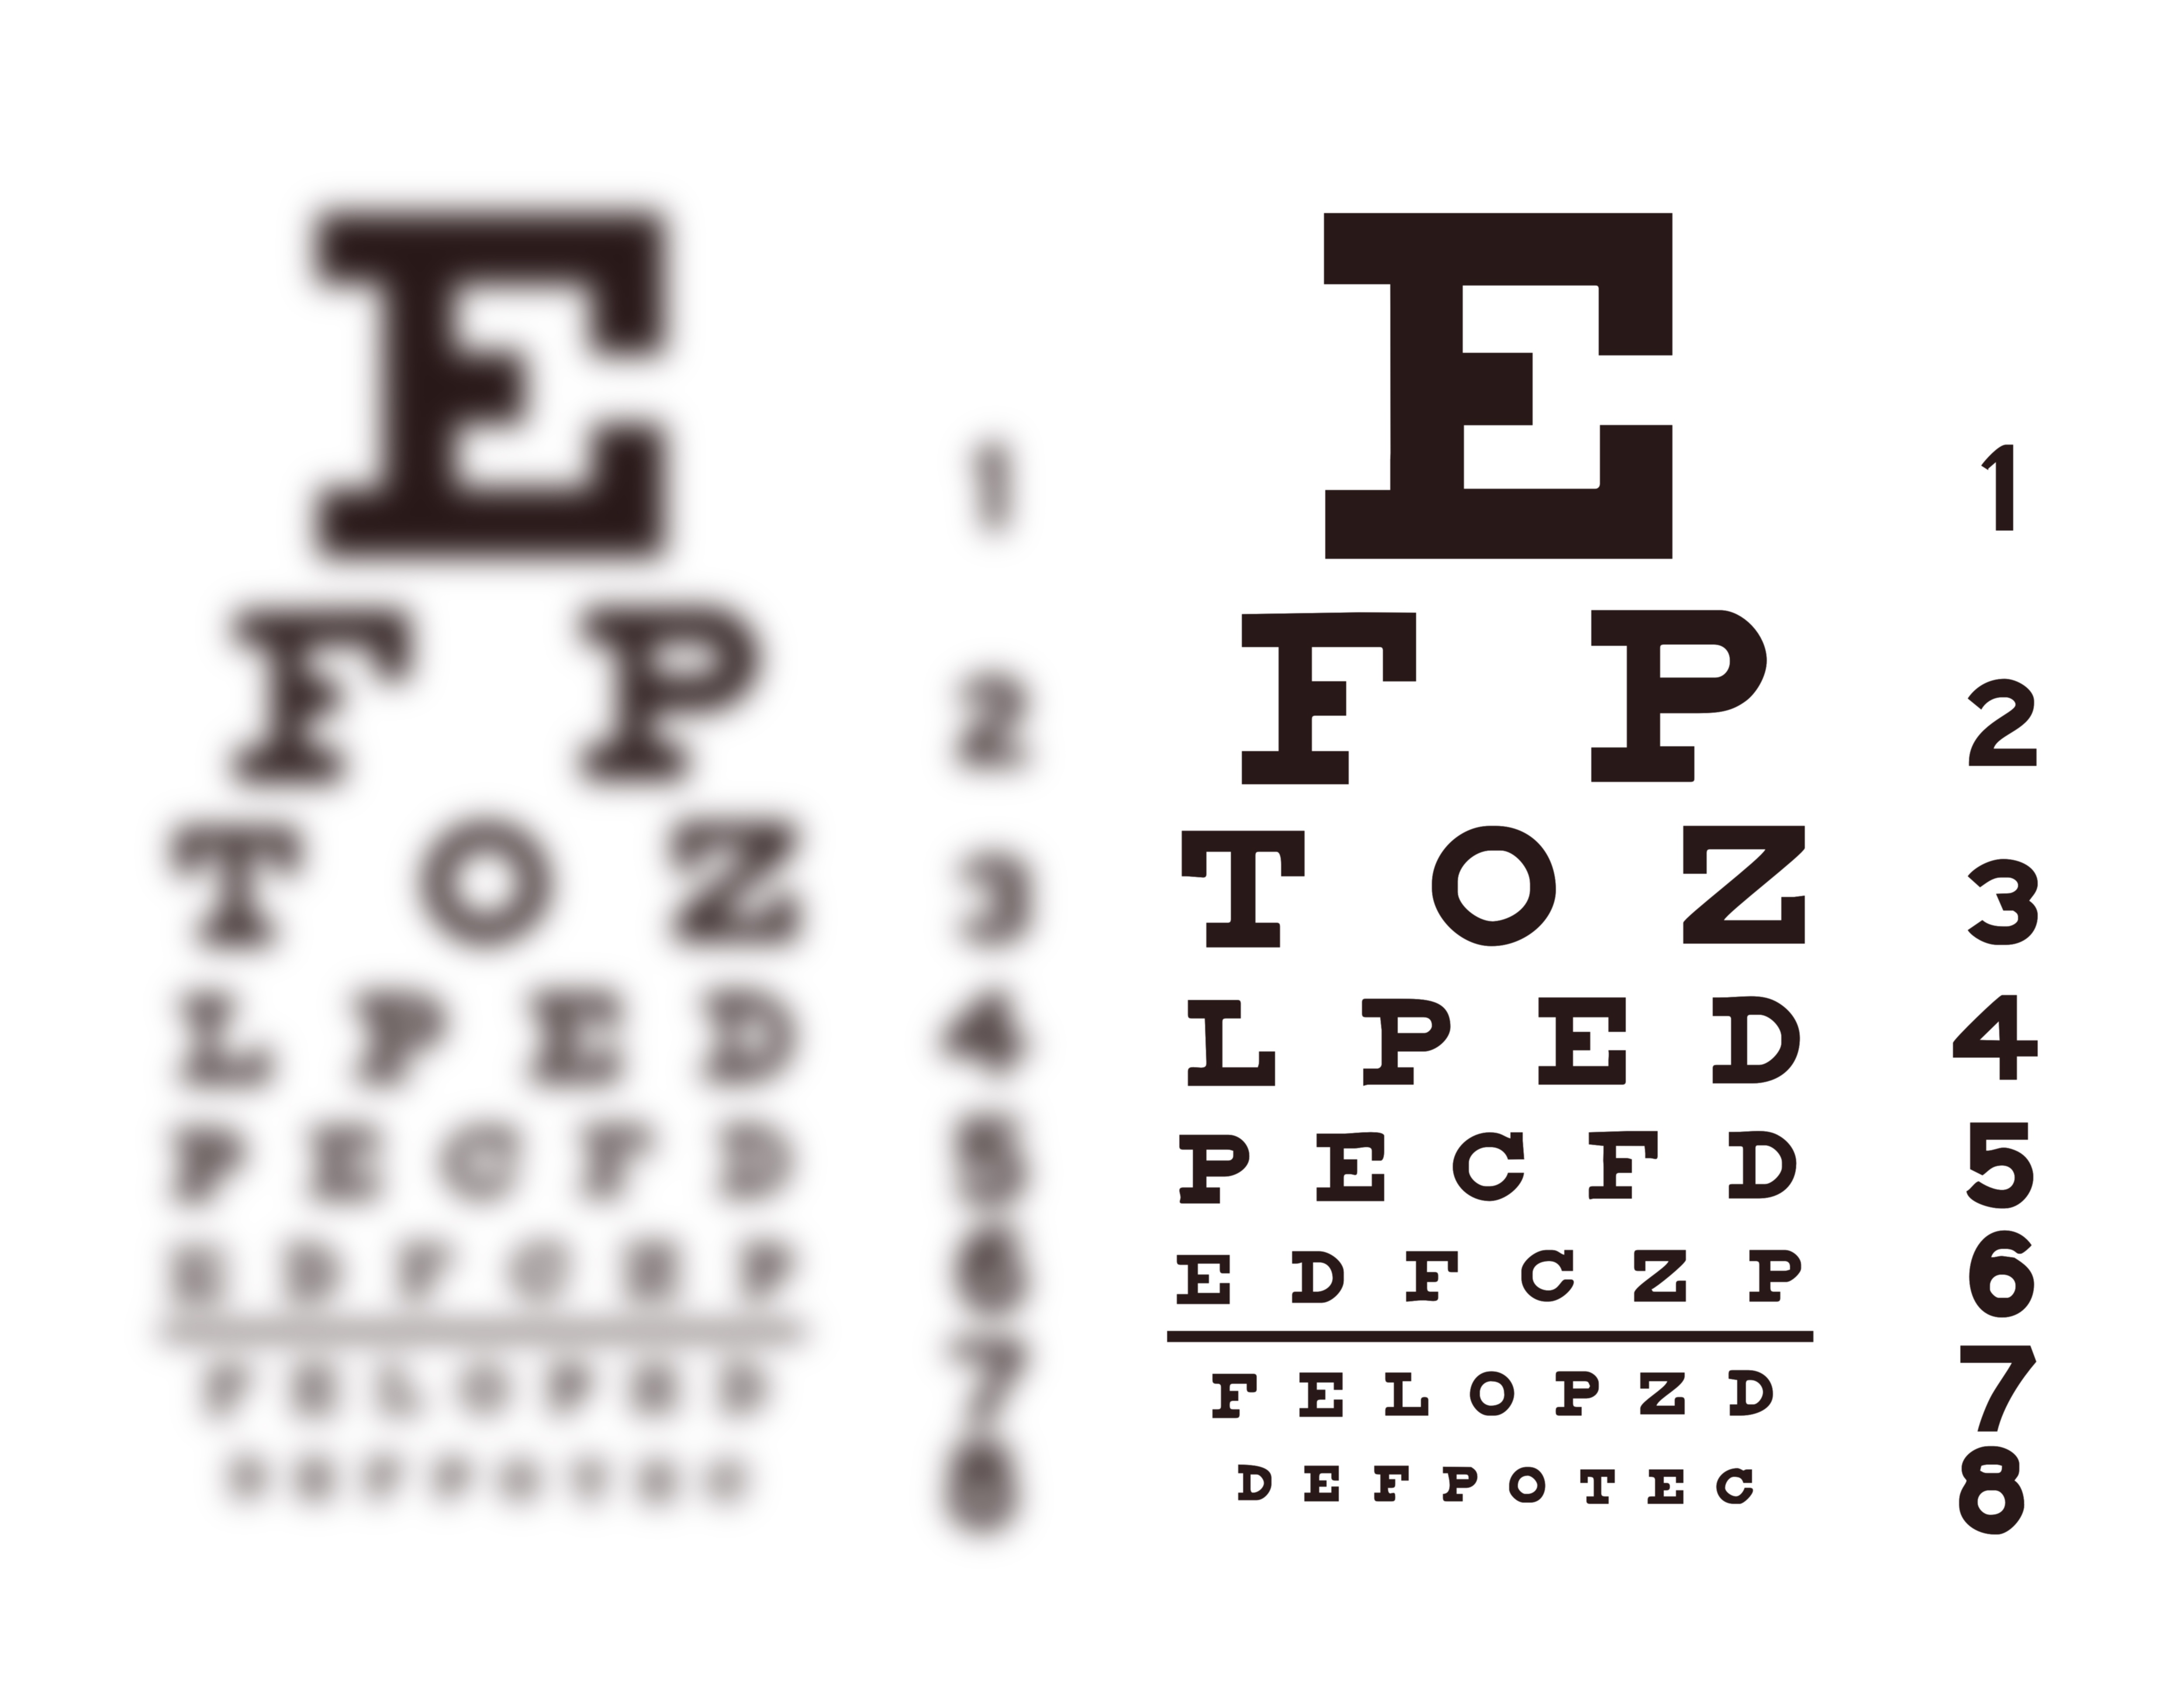 Two eye charts used for testing vision are side by side. One is blurry while the other is crisp.